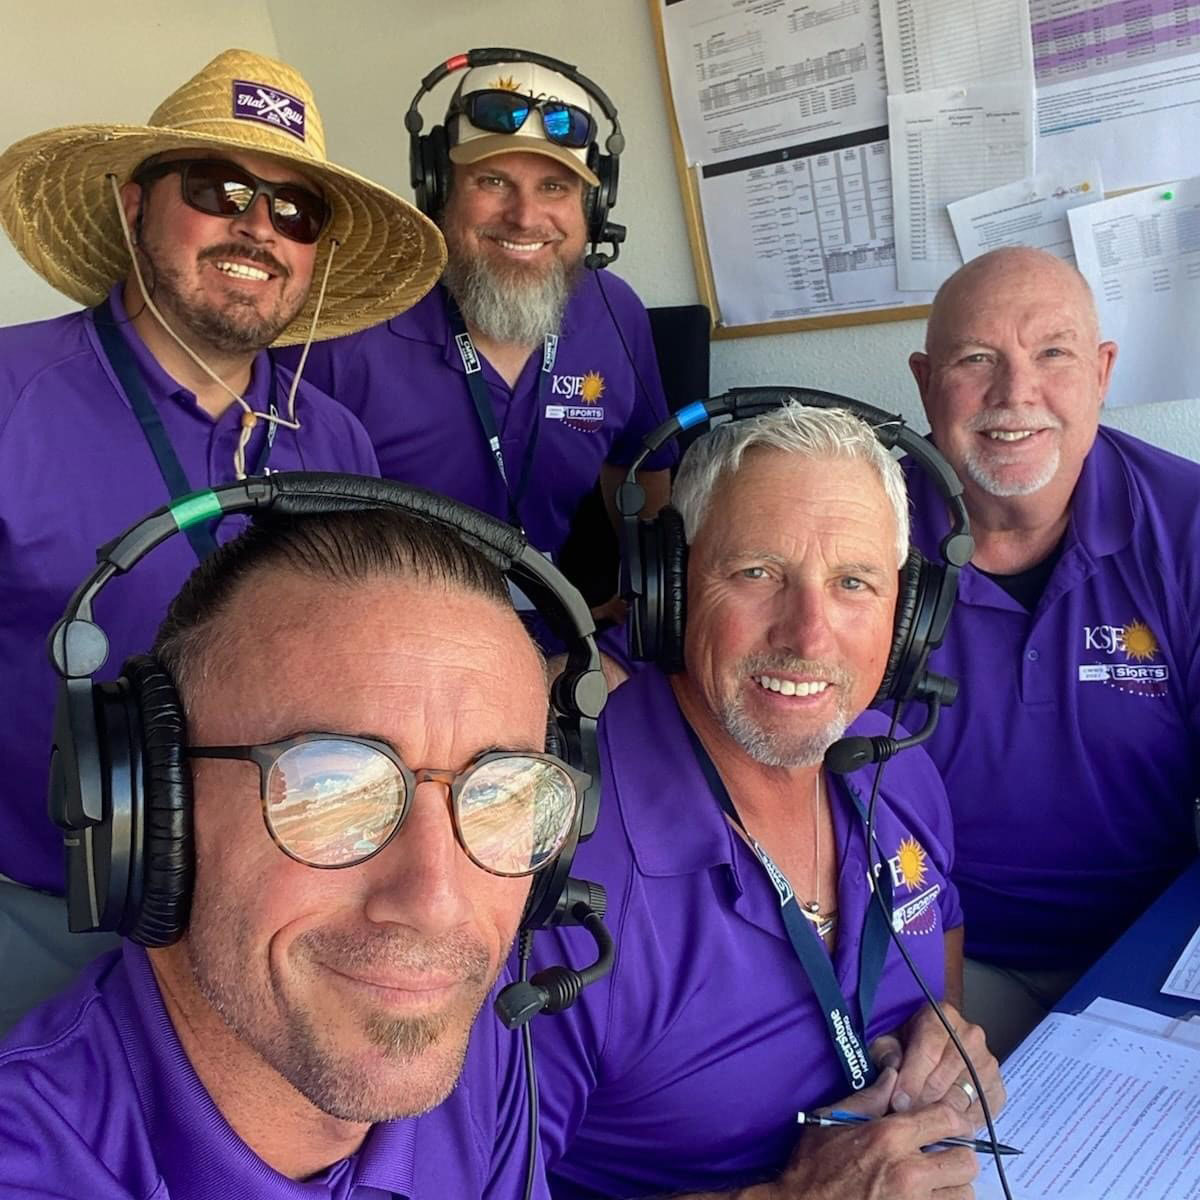 KSJE Connie Mack team members are all smiles in the broadcast booth- left to right Keith Neil, Travis Johnson, Ryan Lane, Kirk Carpenter and Don Lorett.